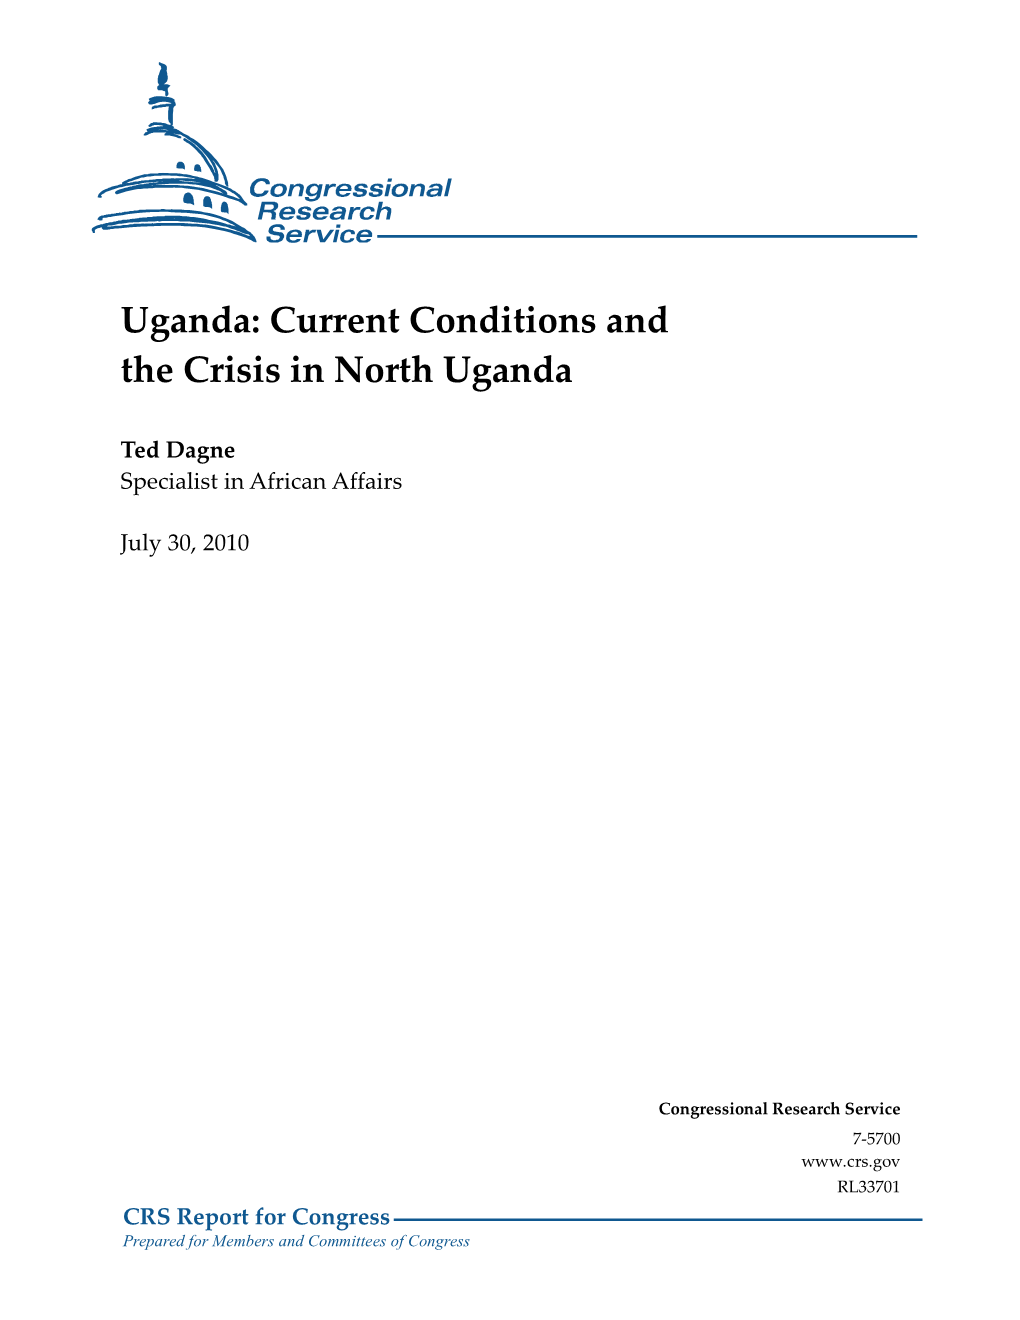 Uganda: Current Conditions and the Crisis in North Uganda